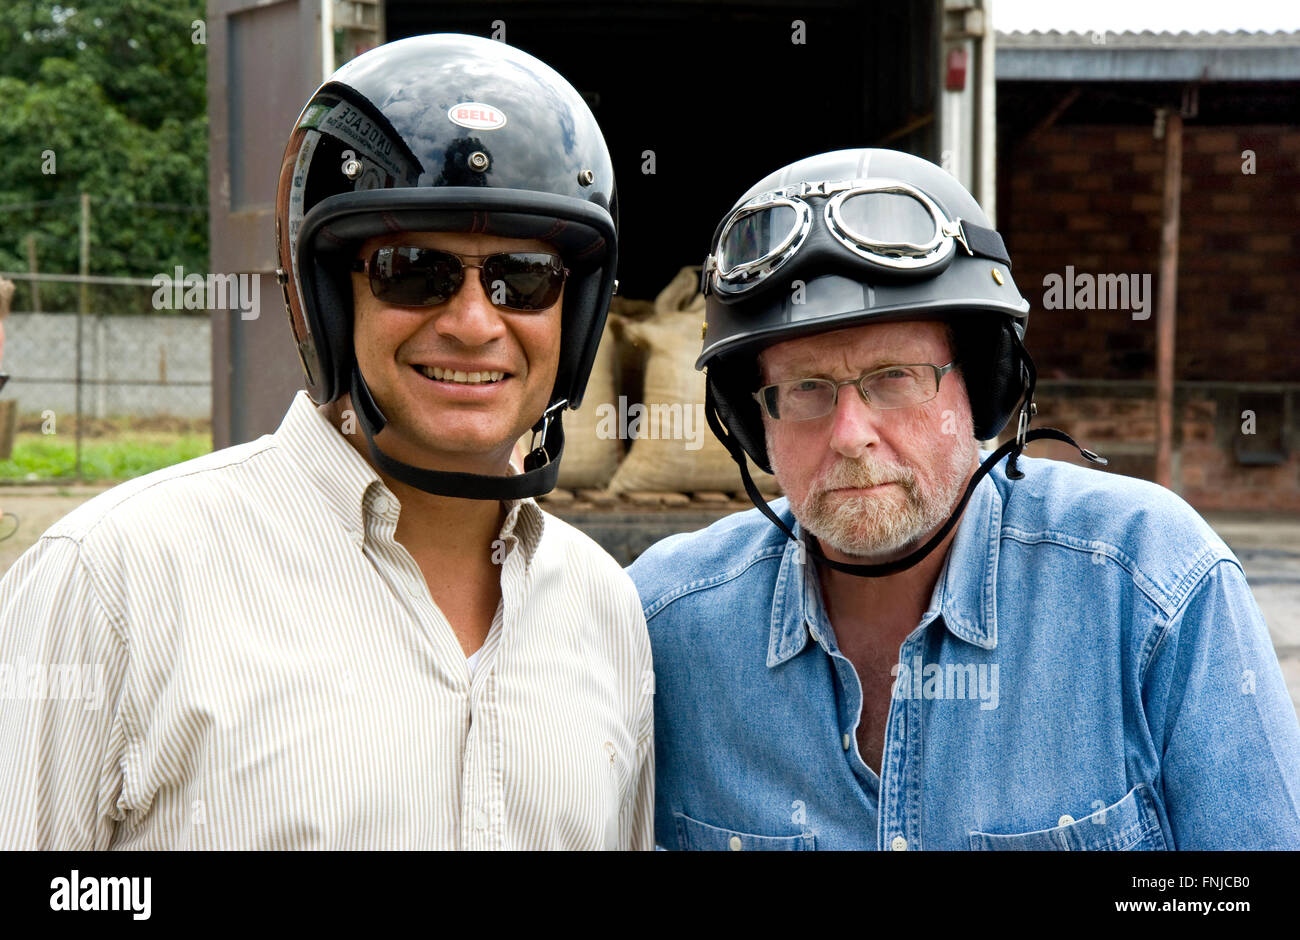 President Rafael Correa and show host Peter Greenberg put on helmets before getting on a classic motorcycle car they use to tour the Cacao region  during shooting of Ecuador: The Royal Tour. Ecuador: The Royal Tour is the seventh in a series of television specials with heads of state of different countries produced and hosted by Emmy Award-winning journalist and CBS News Travel Editor Peter Greenberg. In this latest edition, the President of Ecuador Rafael Correa offers Peter a personal guided tour of his country. The program is scheduled to premier in the U.S. on April 14th, 2016, and Stock Photo